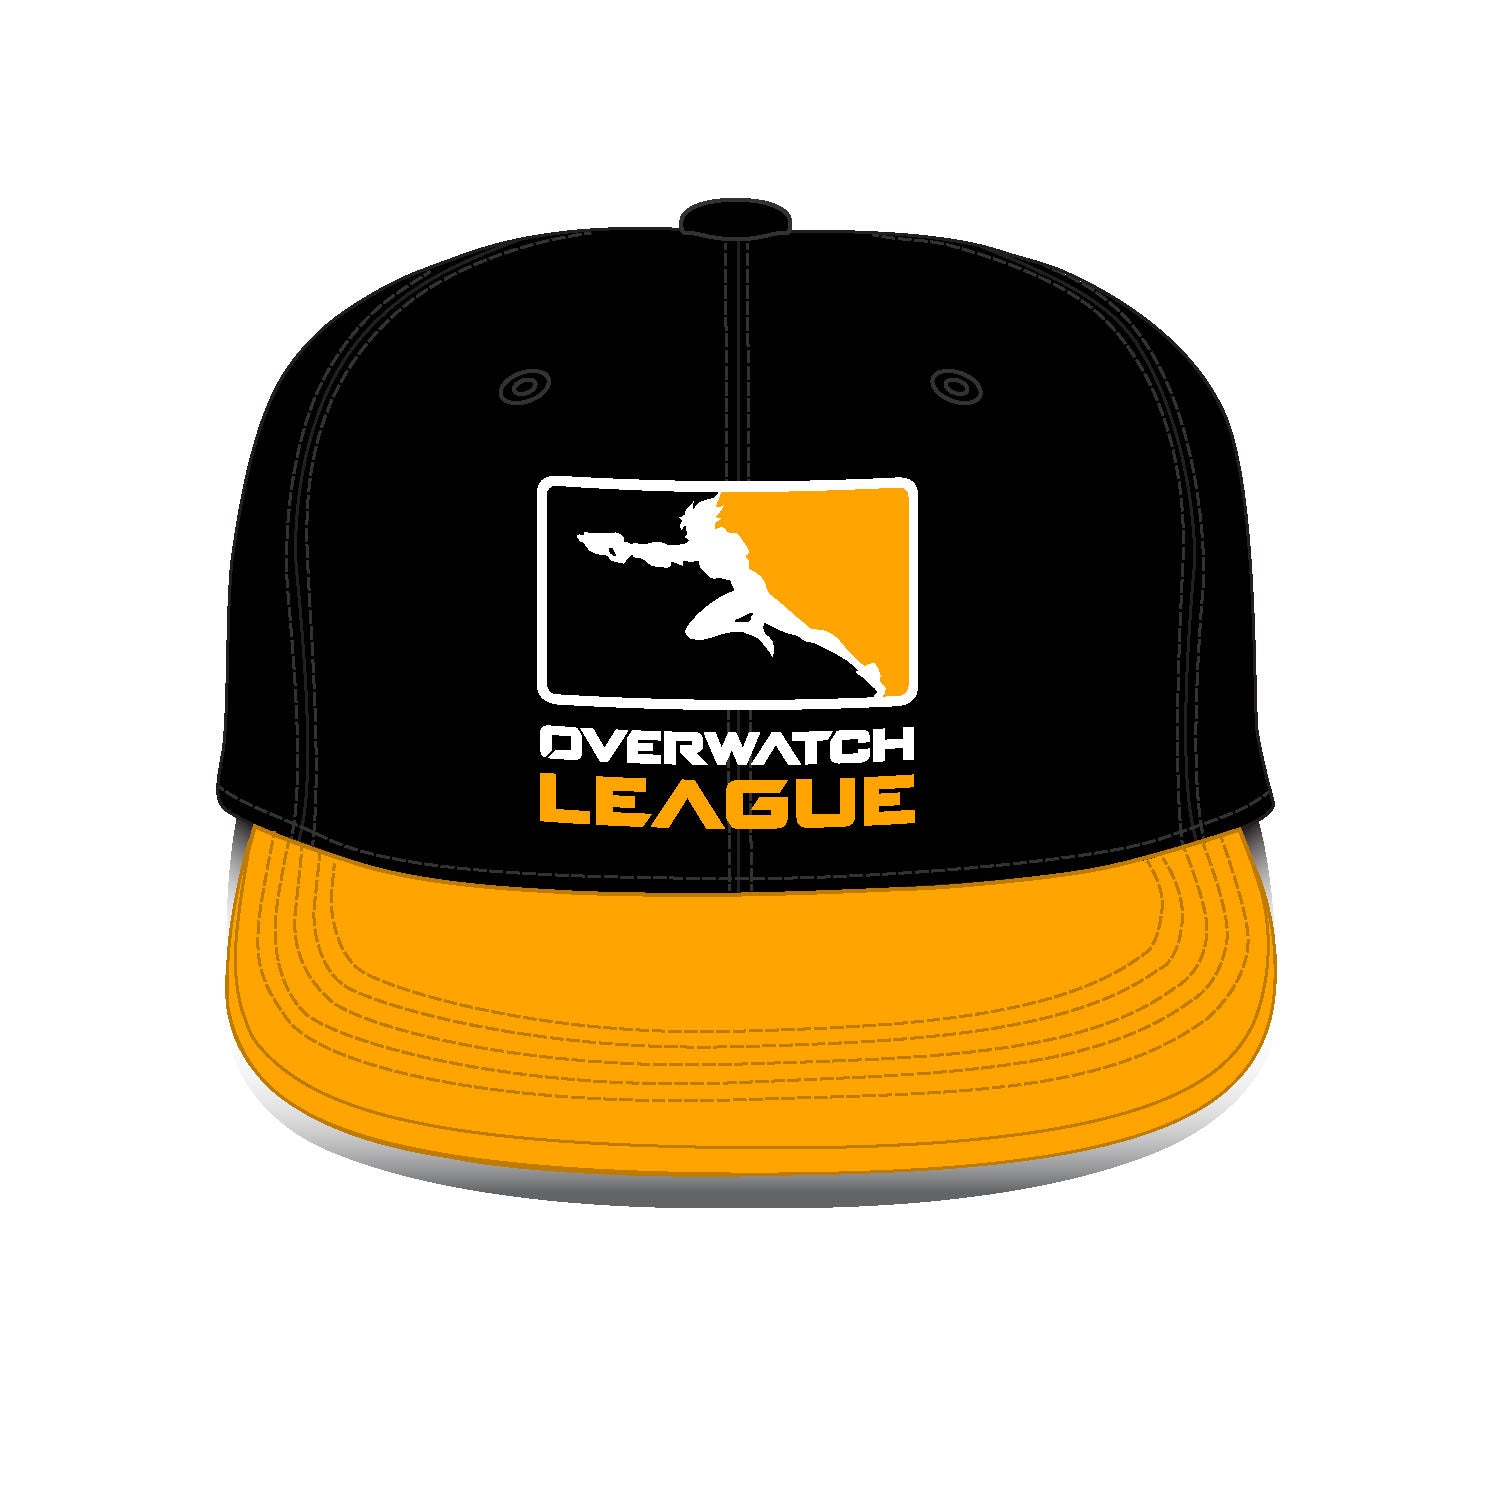 Overwatch League Black Snapback Hat - Front View